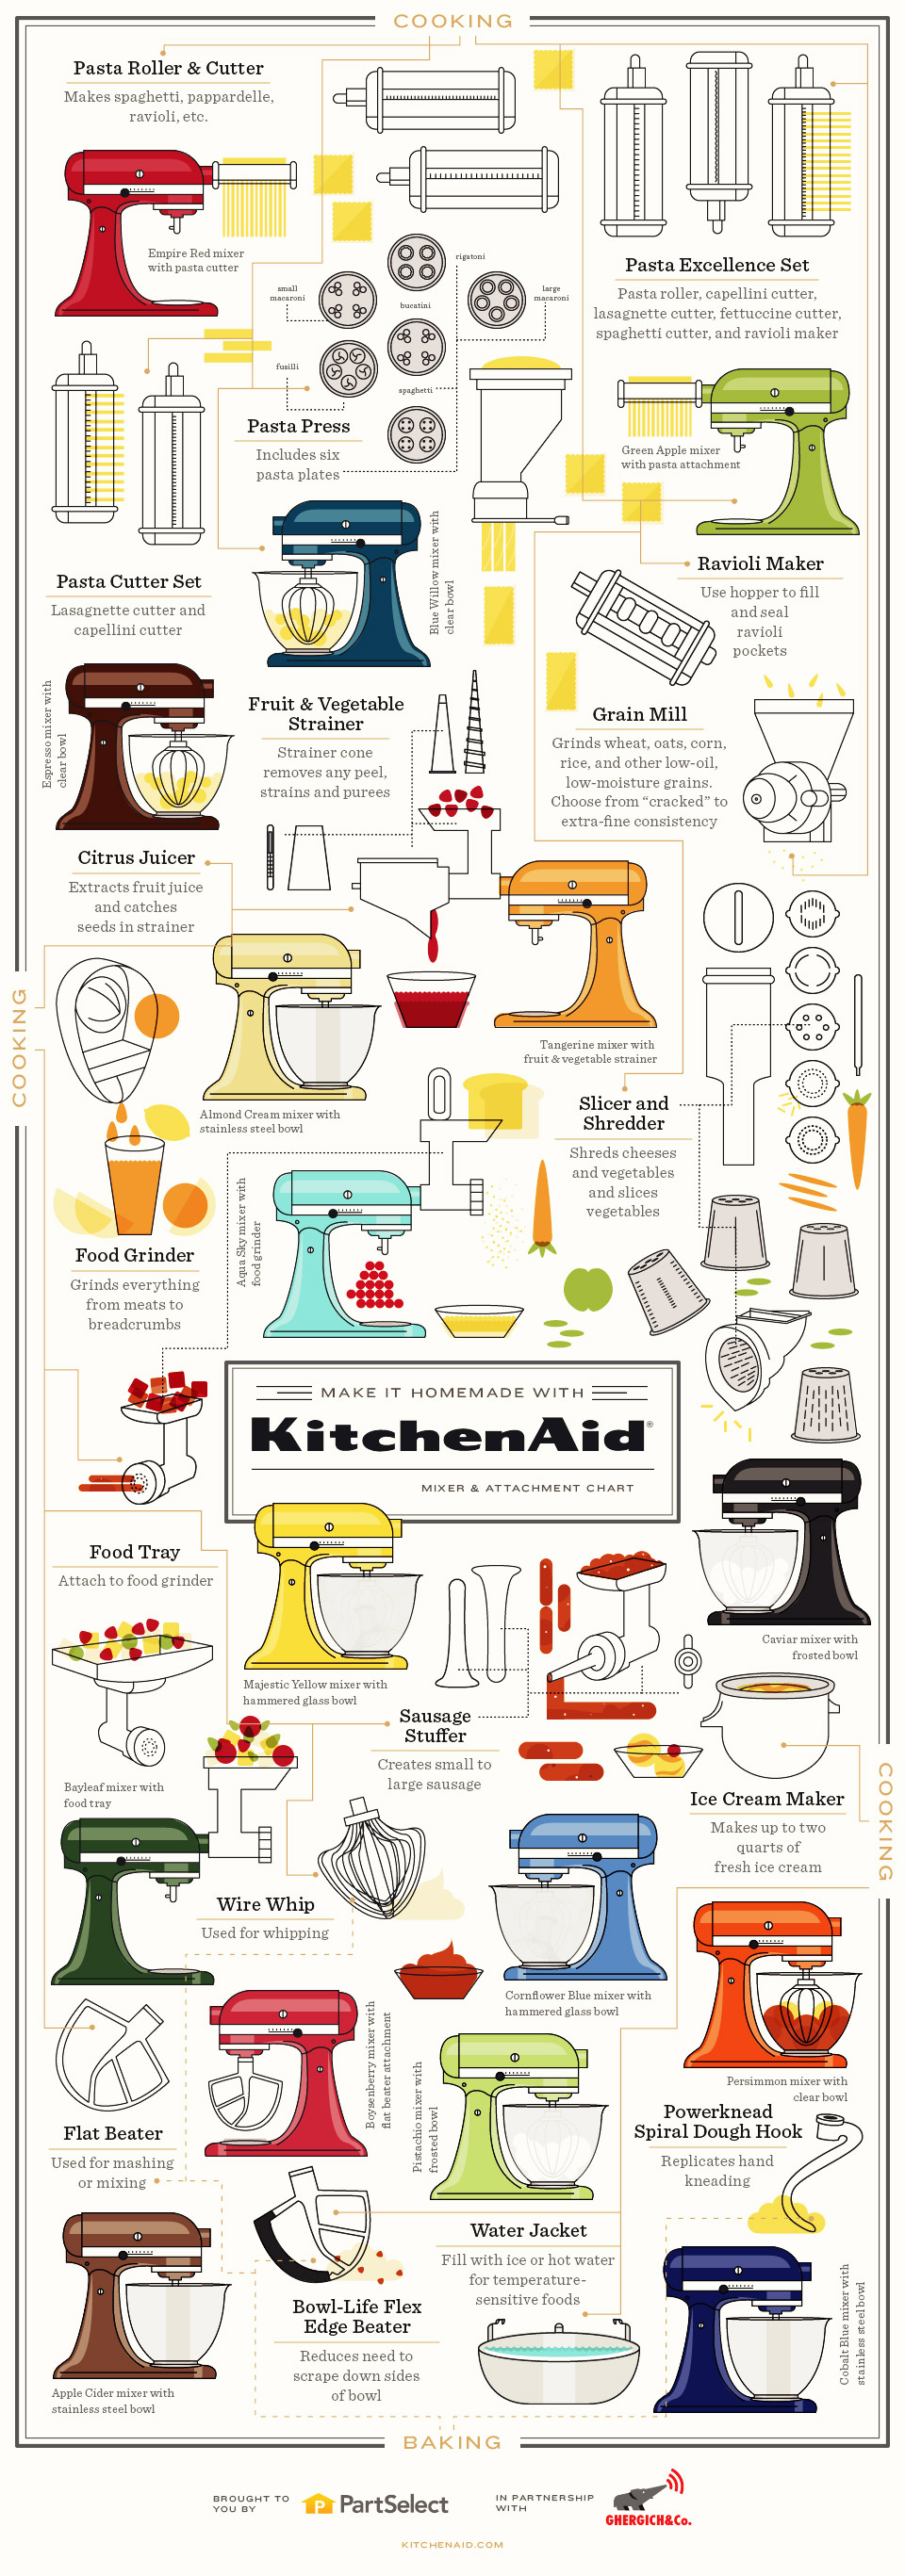 https://www.partselect.com/images/just-for-fun/Make-it-Homemade-with-KitchenAid-Infographic.jpg